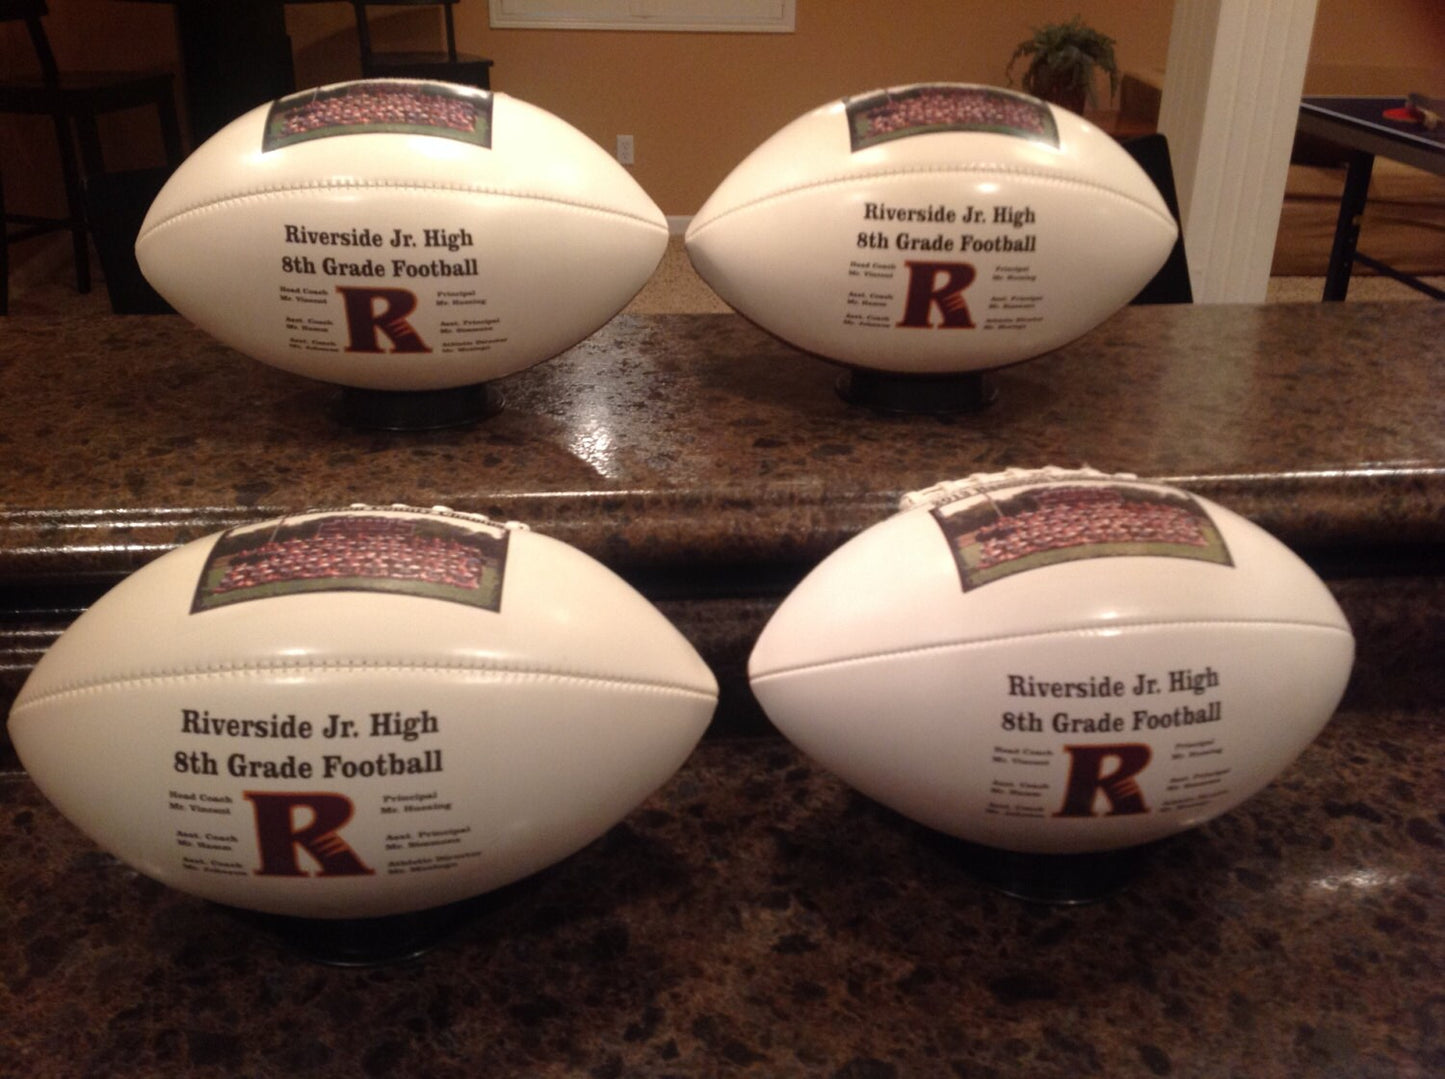 Personalized Custom Made Regulation Size Footballs for Coaches' Gifts, Senior Gifts, Football Gifts, Team Awards, Sponsors, Weddings